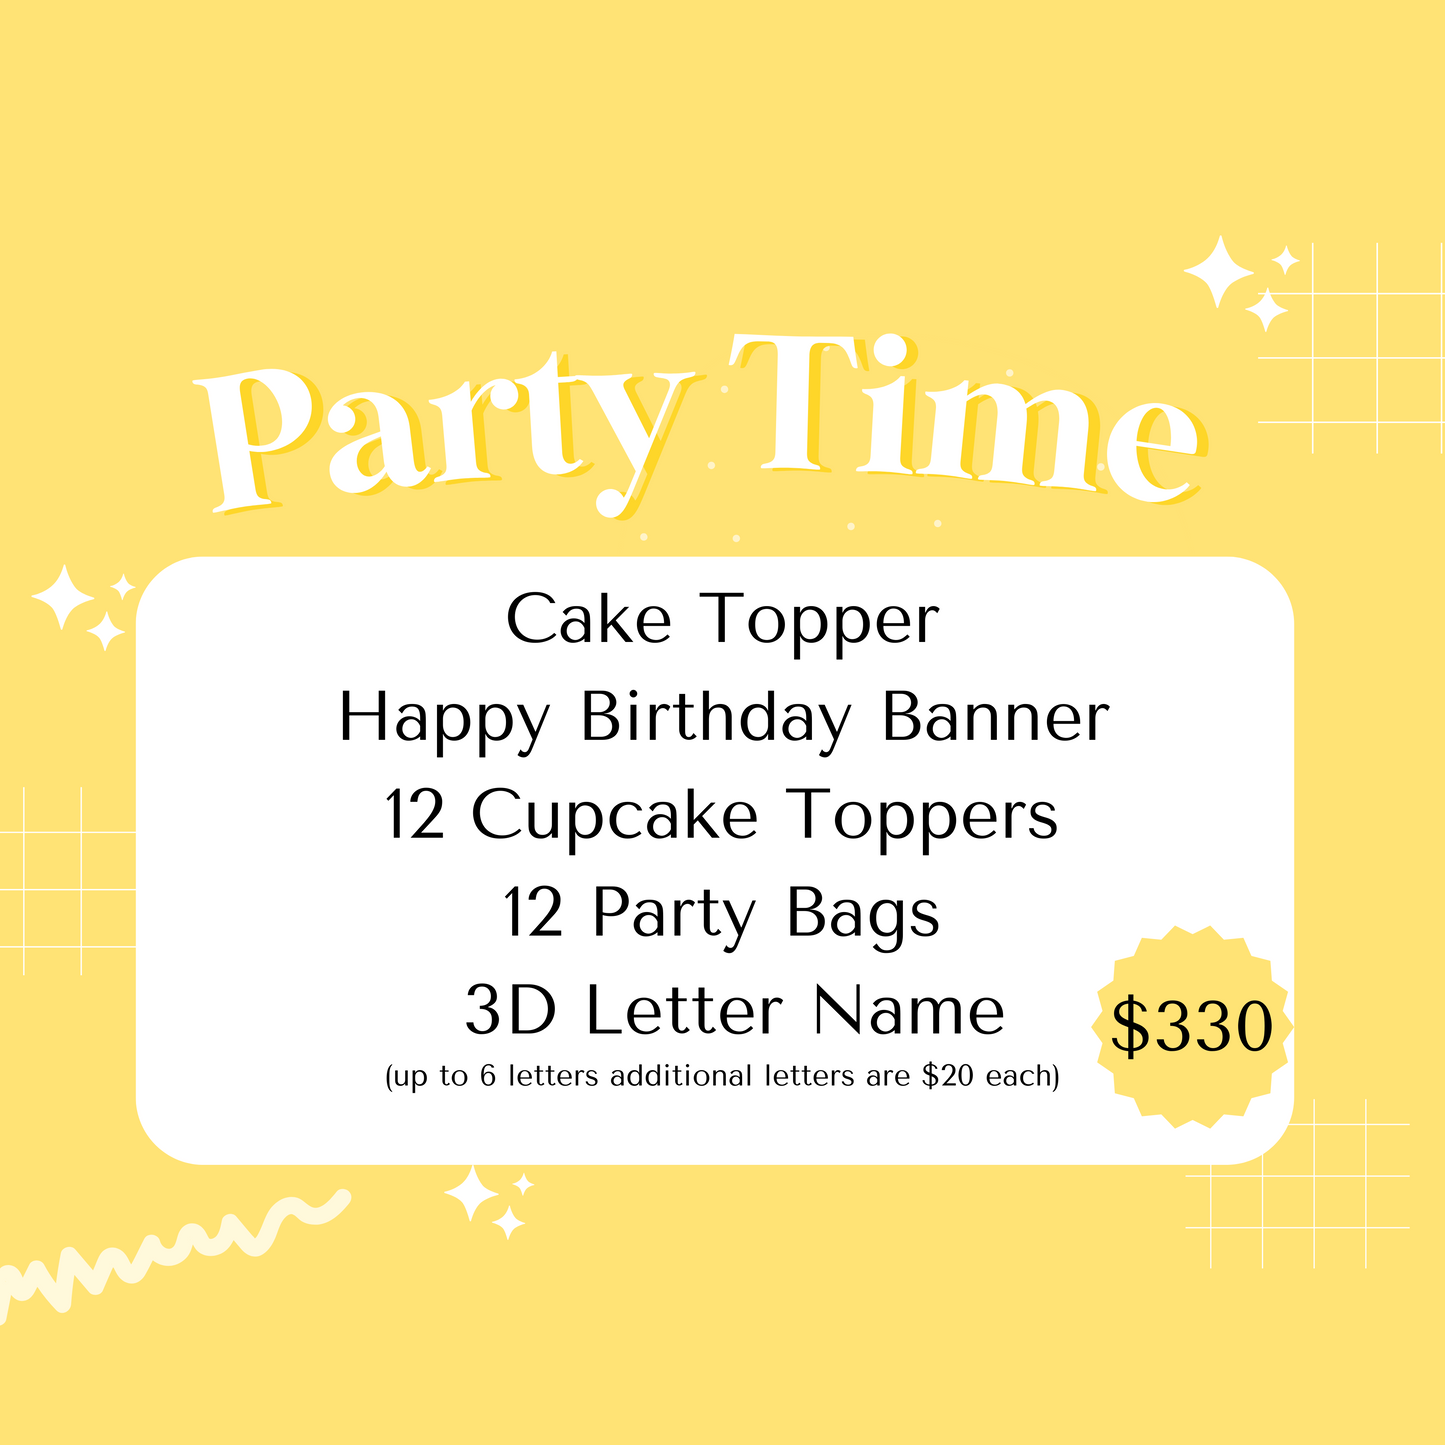 Party Time Package